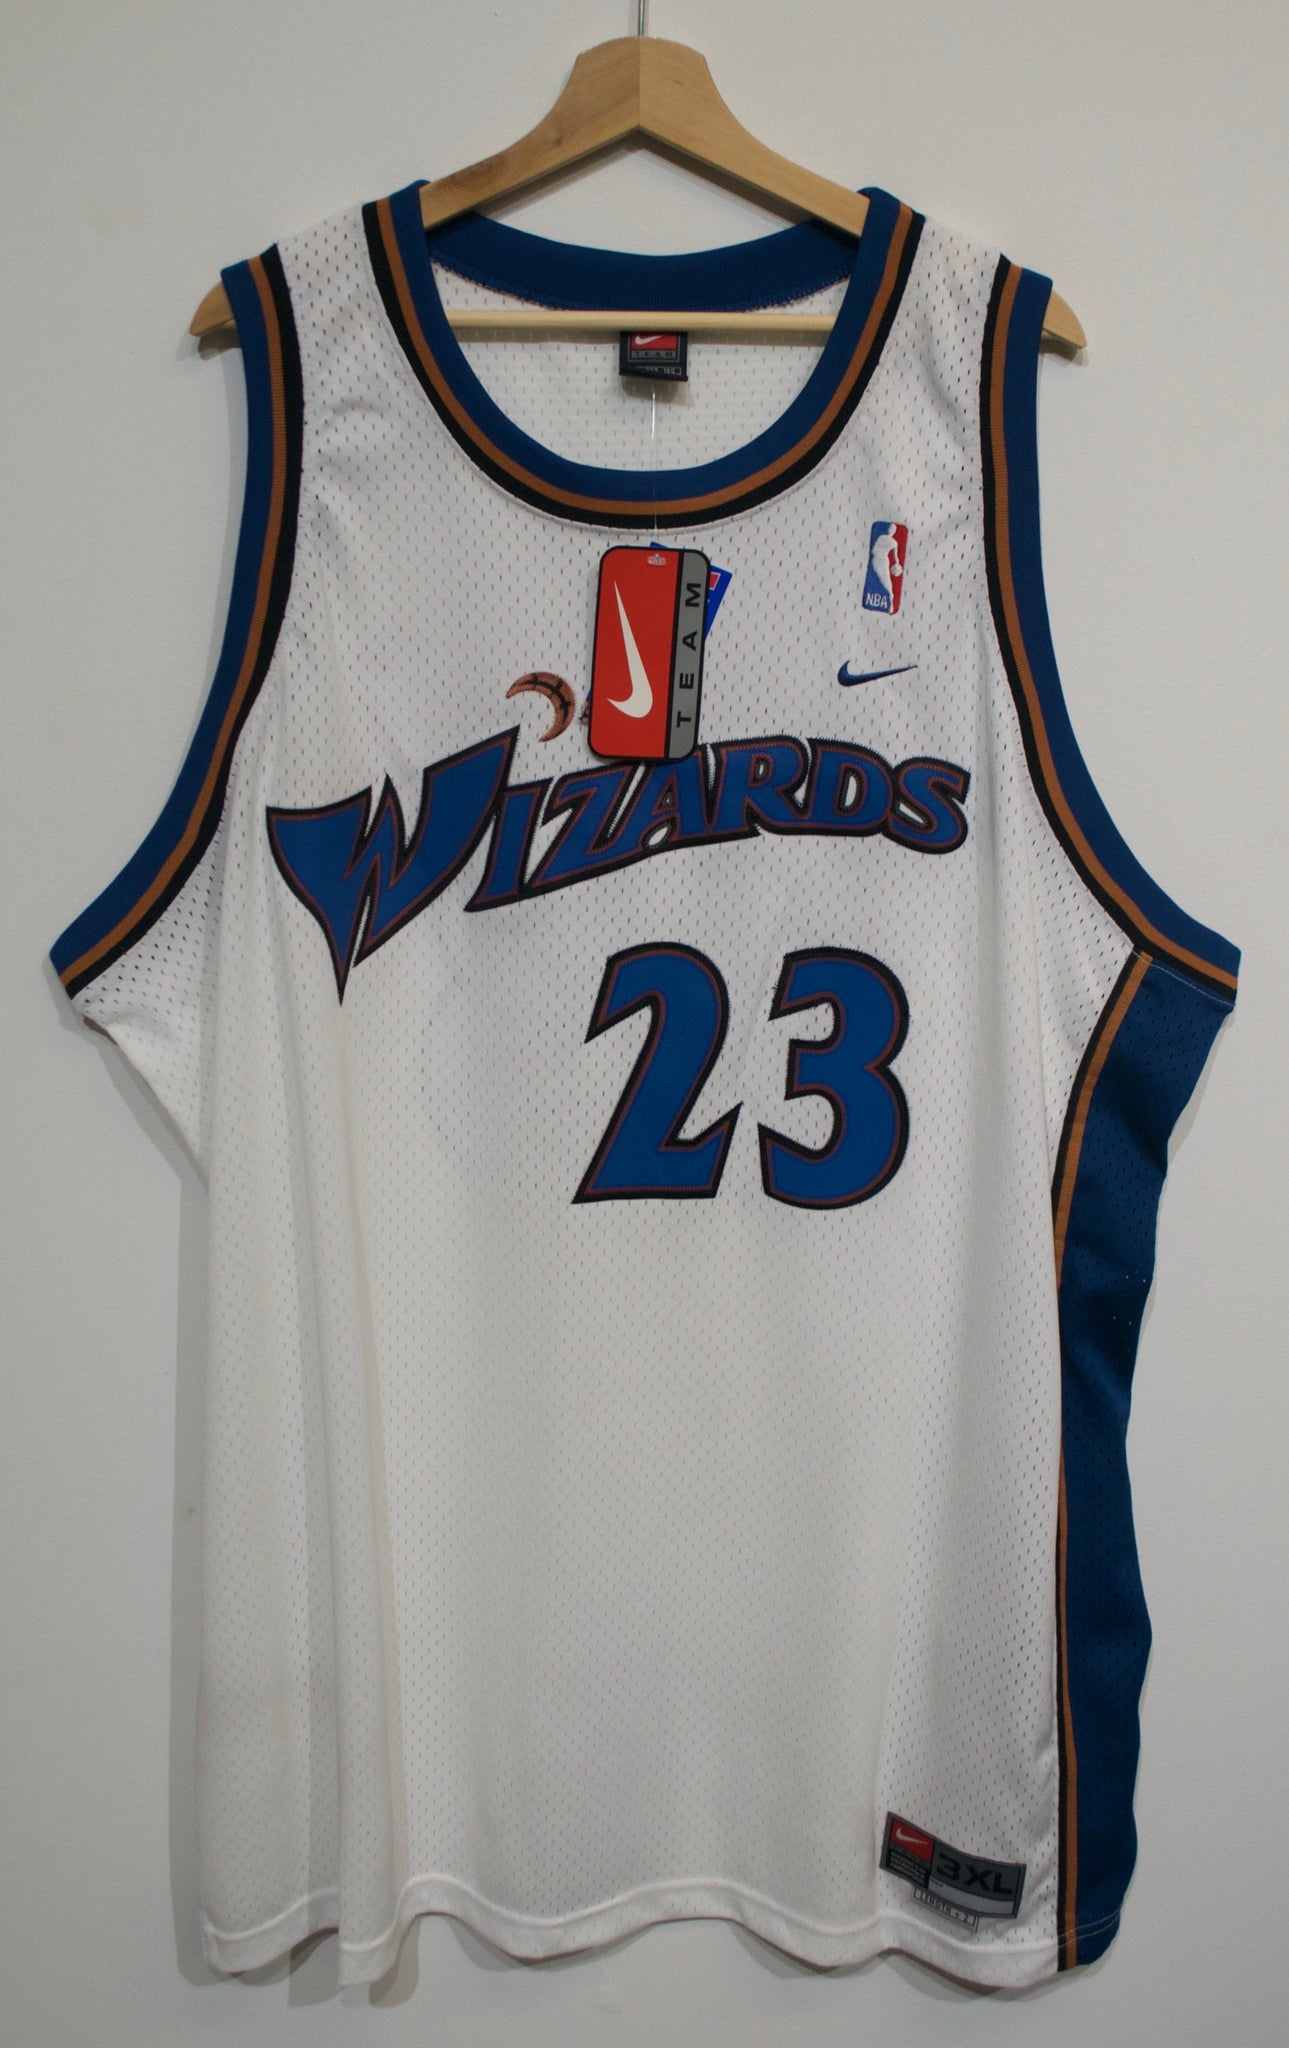 New Jersey Wizards